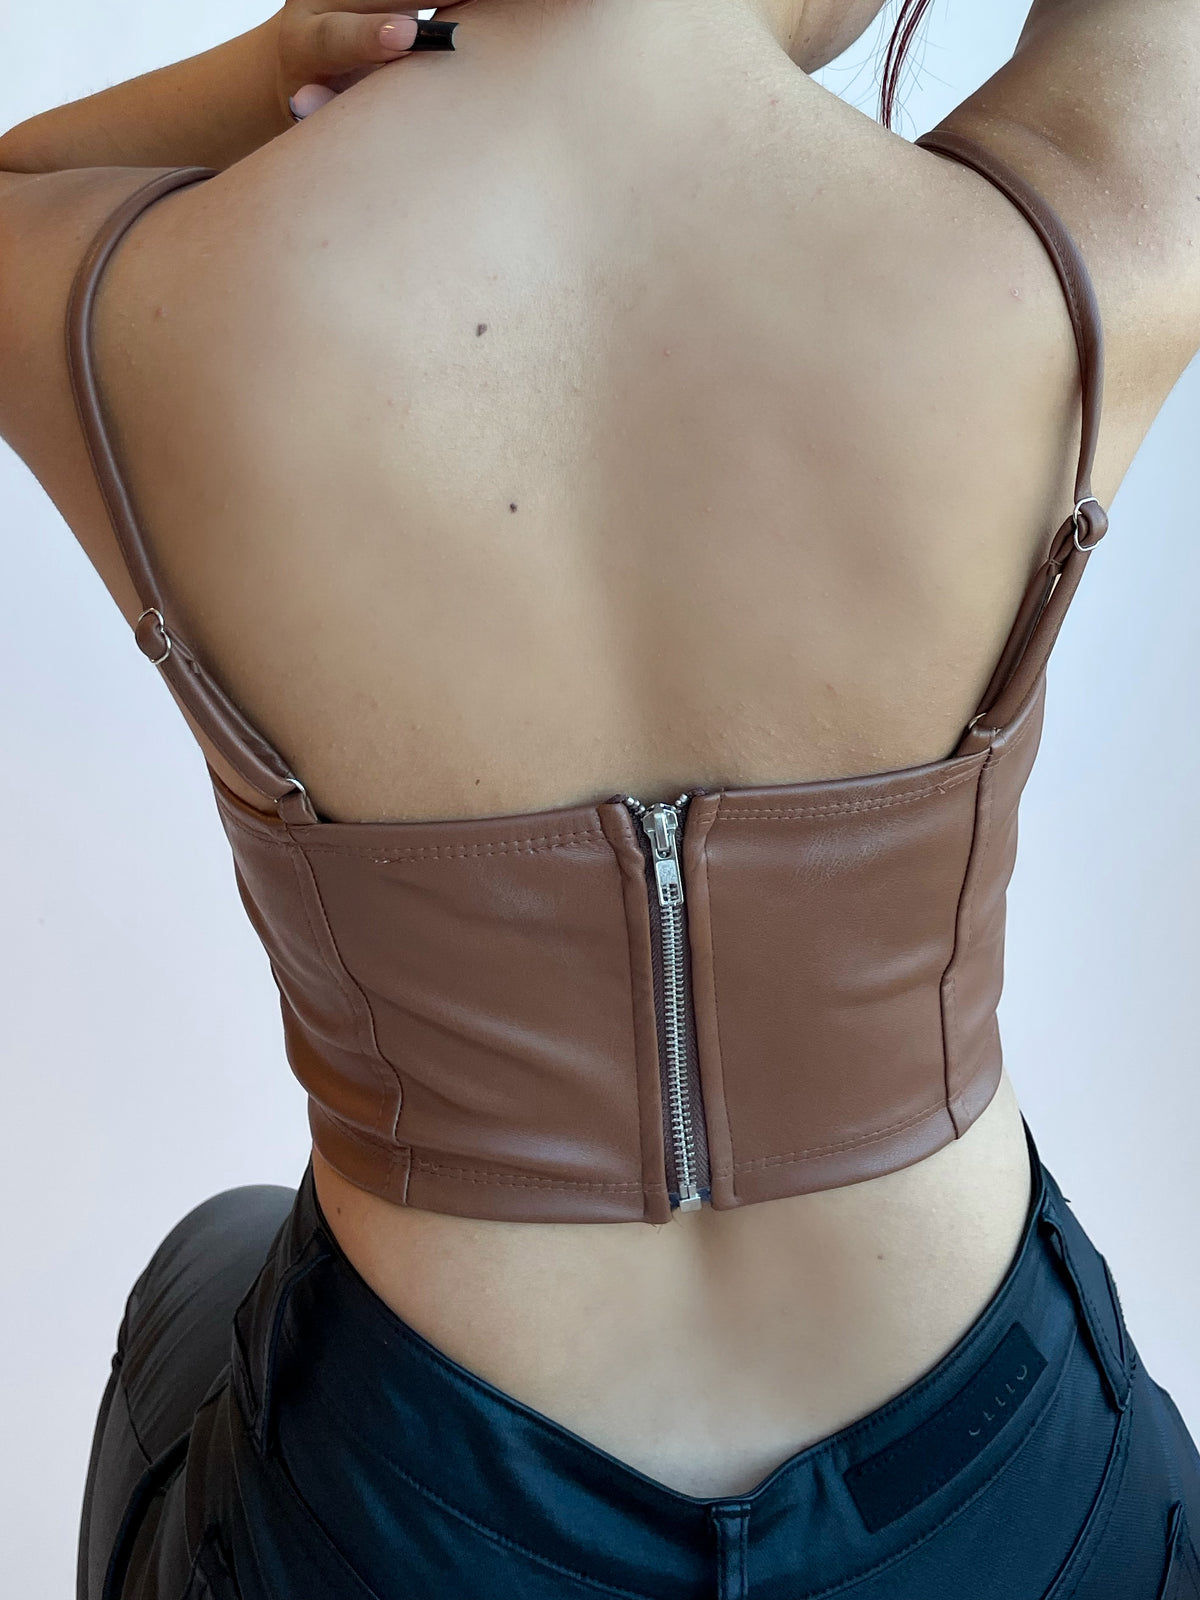 brown faux leather top, crop top, spaghetti straps, adjustable straps, lace up front tie, silver hoops